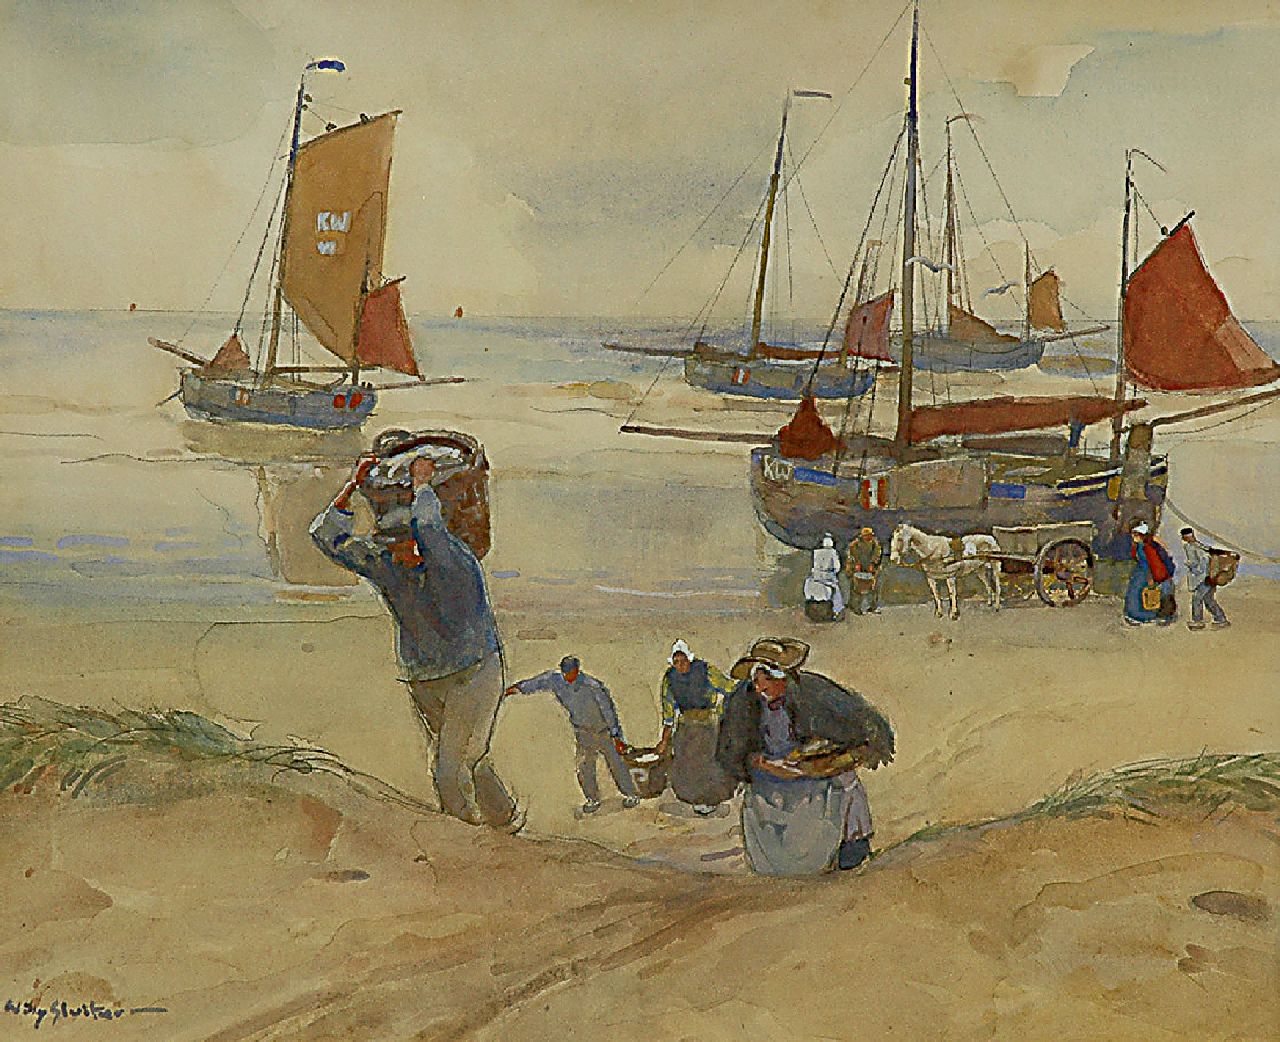 Sluiter J.W.  | Jan Willem 'Willy' Sluiter, After the fish auction on the beach of Katwijk, watercolour and gouache on paper 62.0 x 74.1 cm, signed l.l.